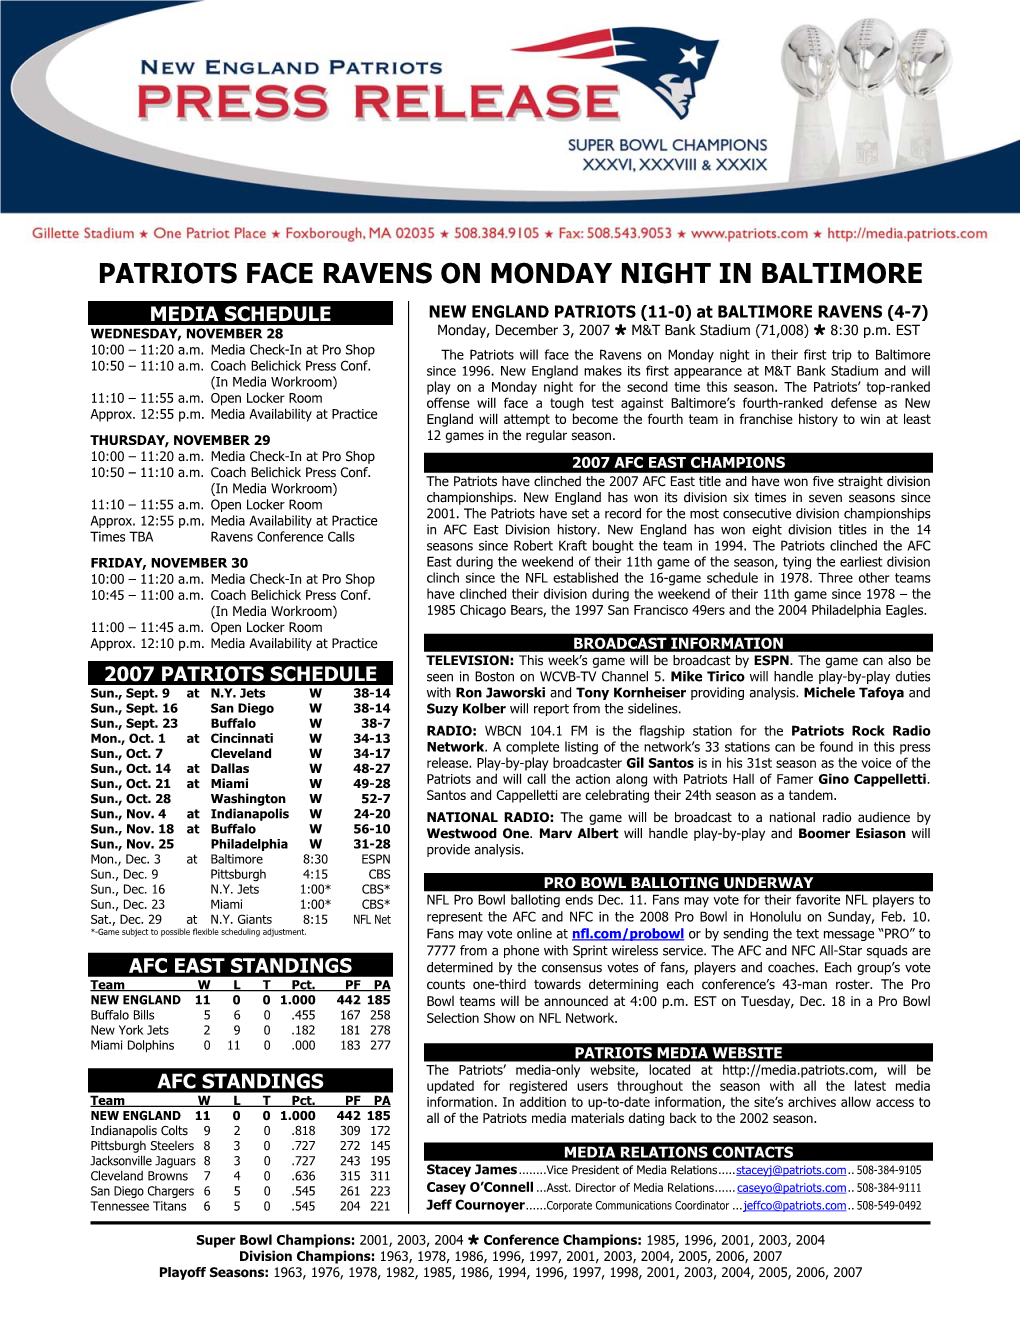 Patriots Face Ravens on Monday Night in Baltimore